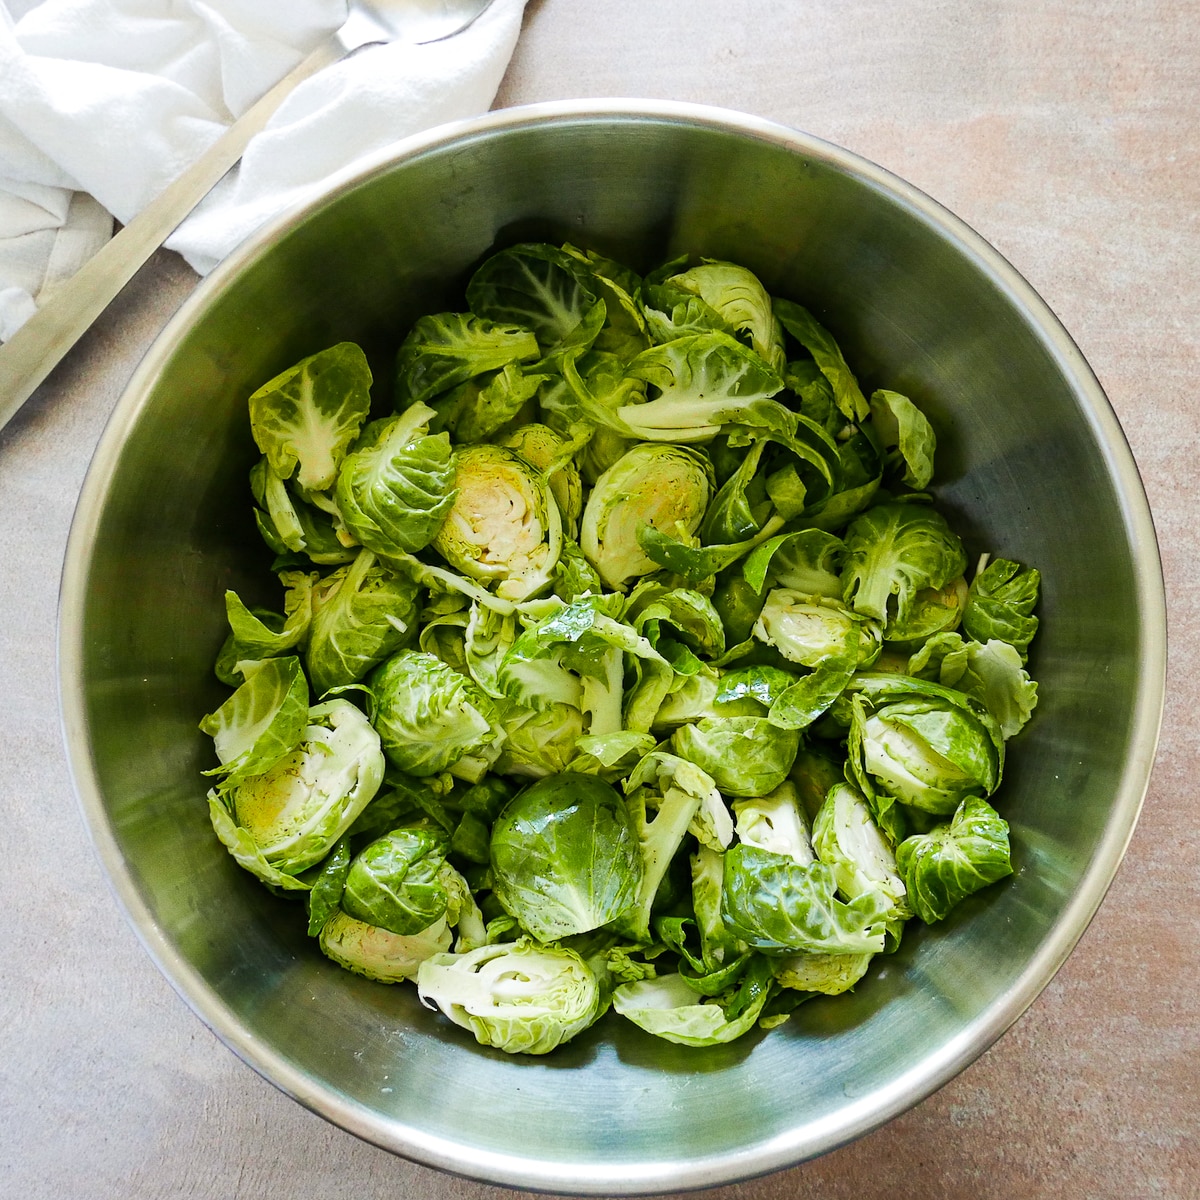 Halved brussels sprouts tossed with olive oil, garlic, and seasoning in a mixing bowl. 